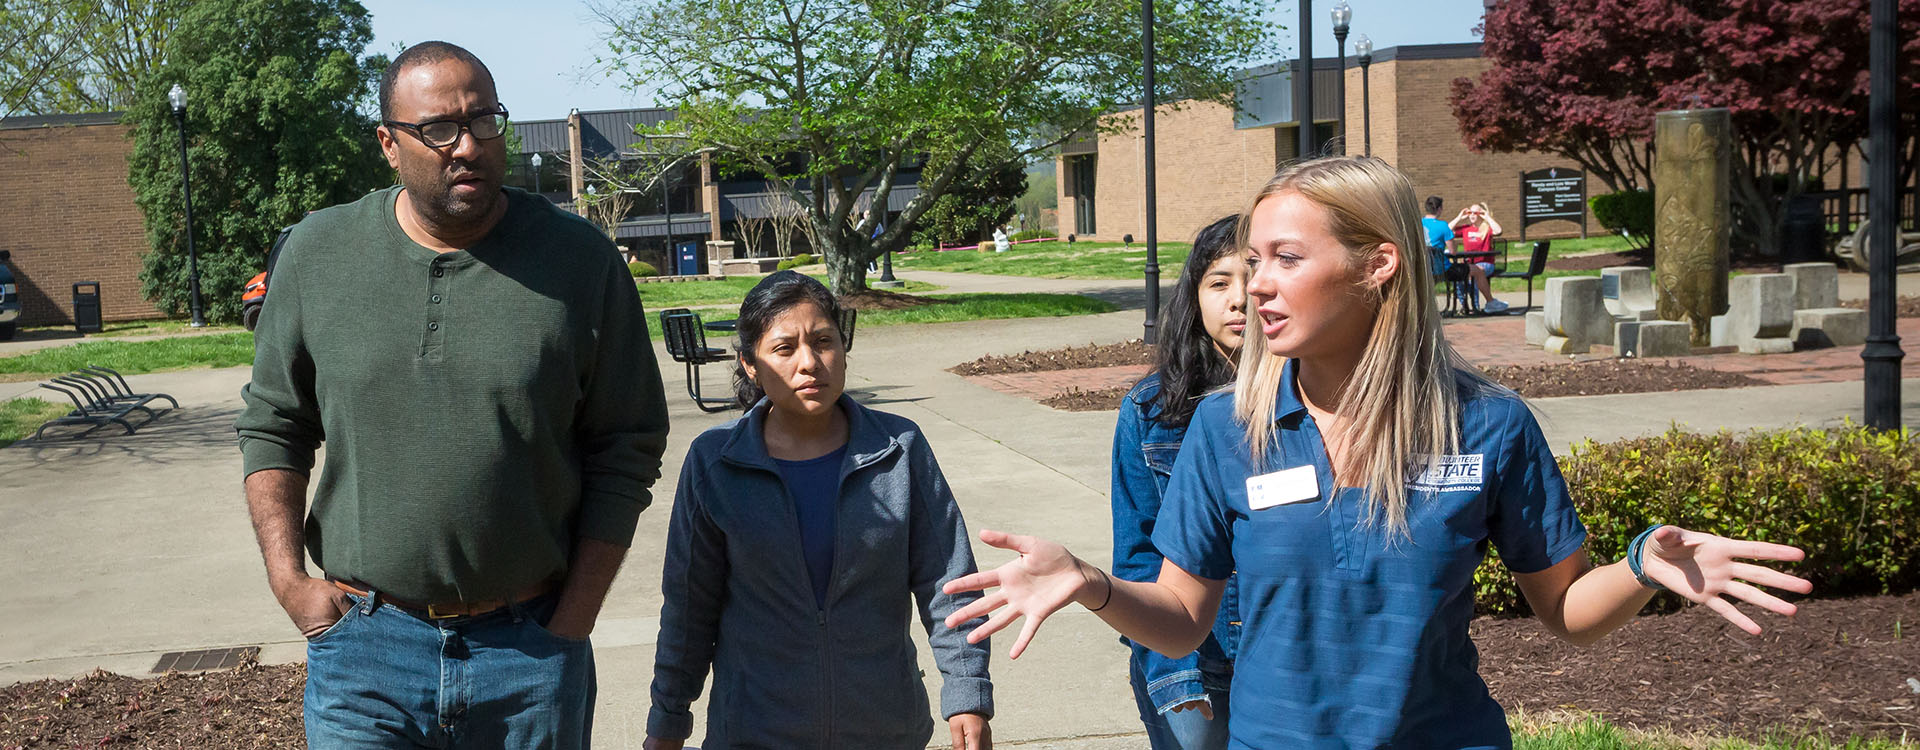 a campus tour guide leading a group